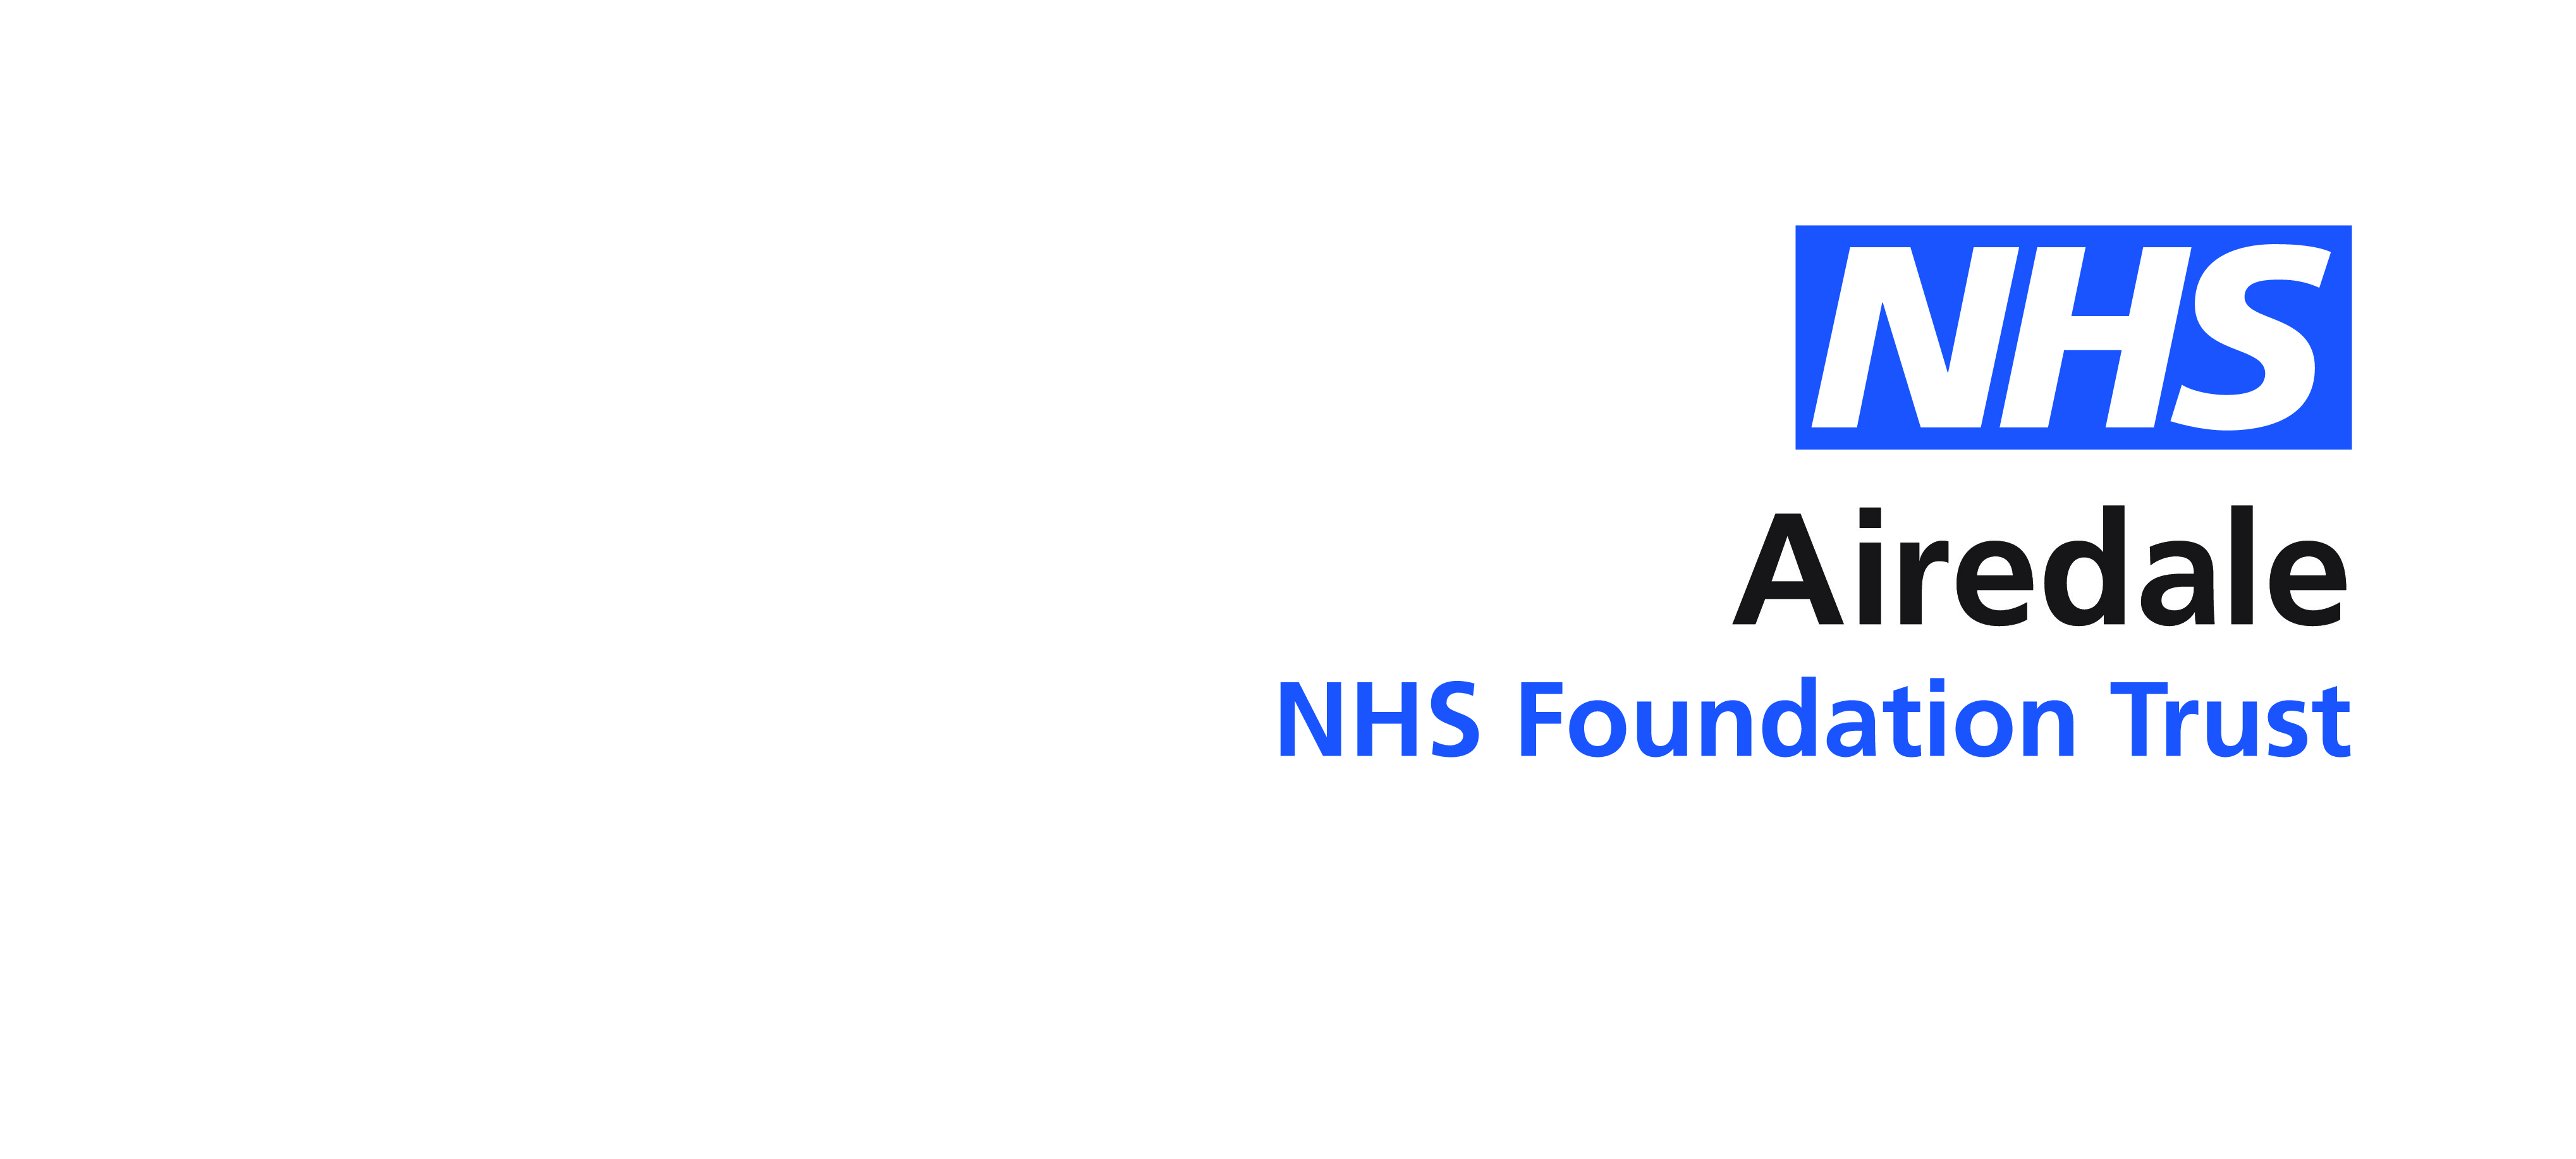 Hope for Tomorrow announces partnership with Airedale NHS Foundation Trust